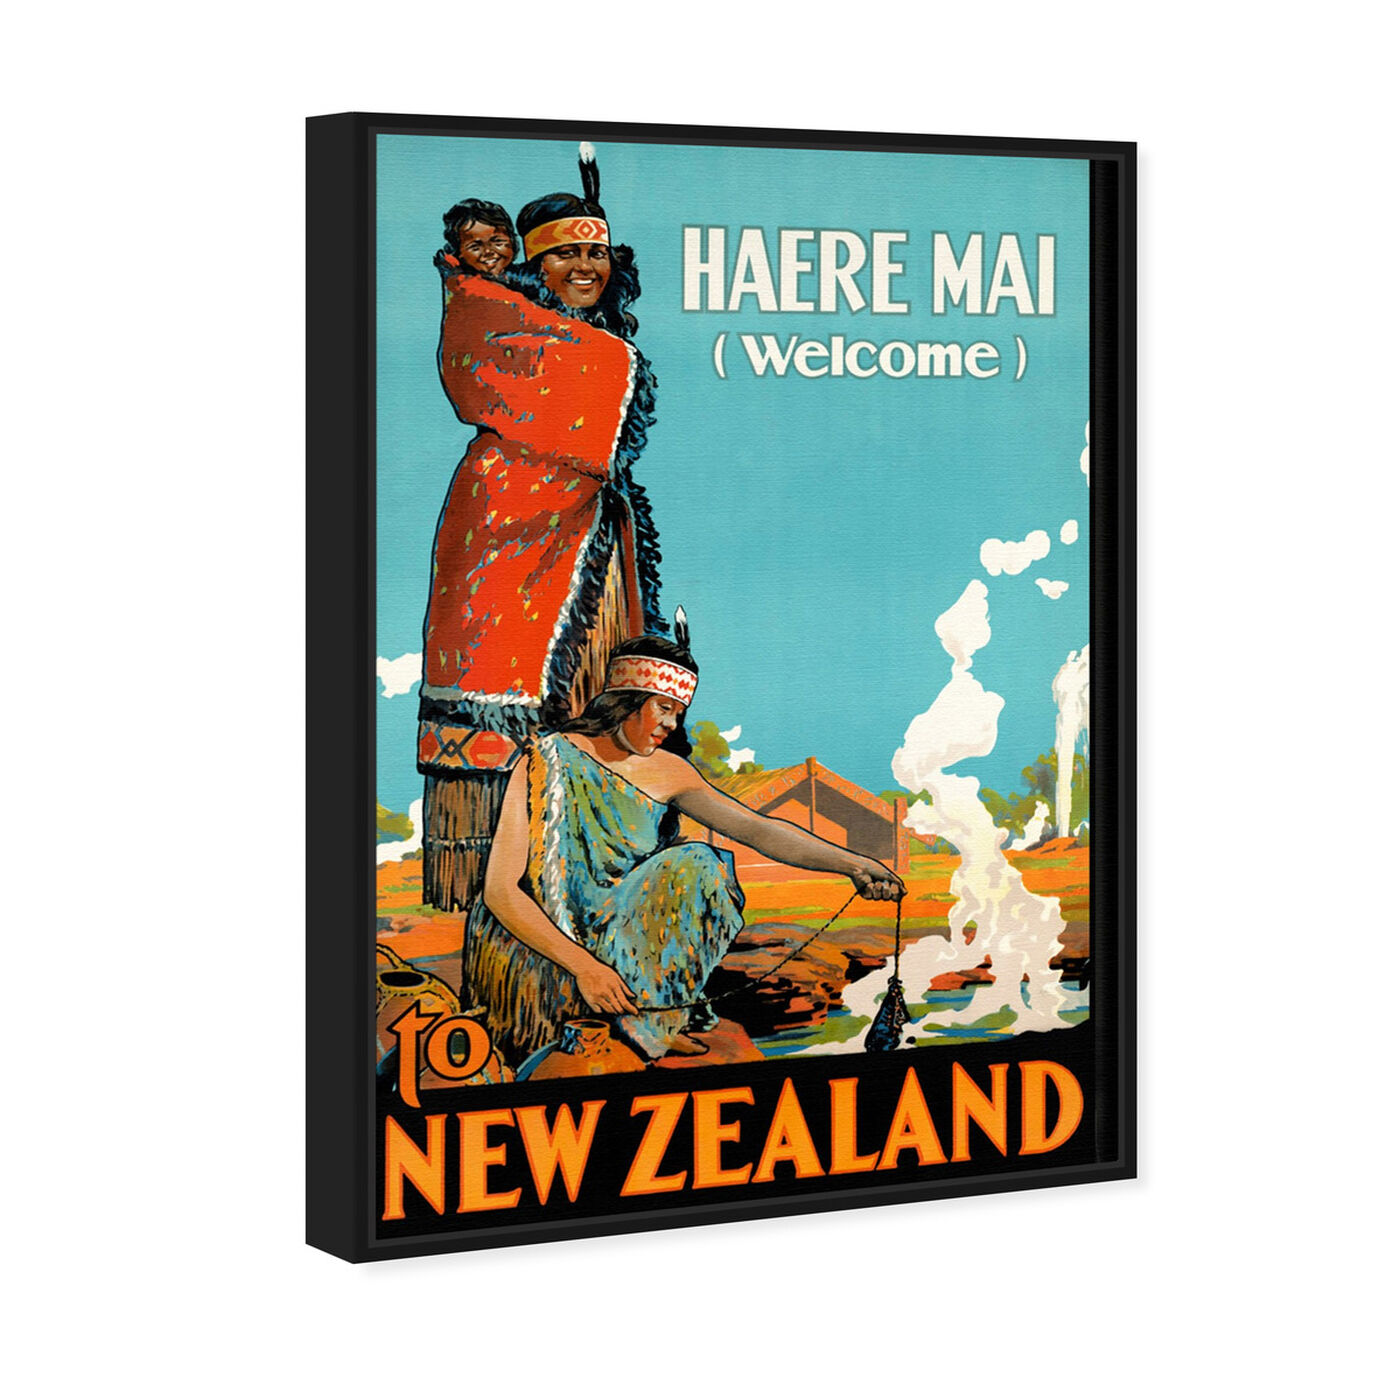 Angled view of New Zealand featuring advertising and posters art.